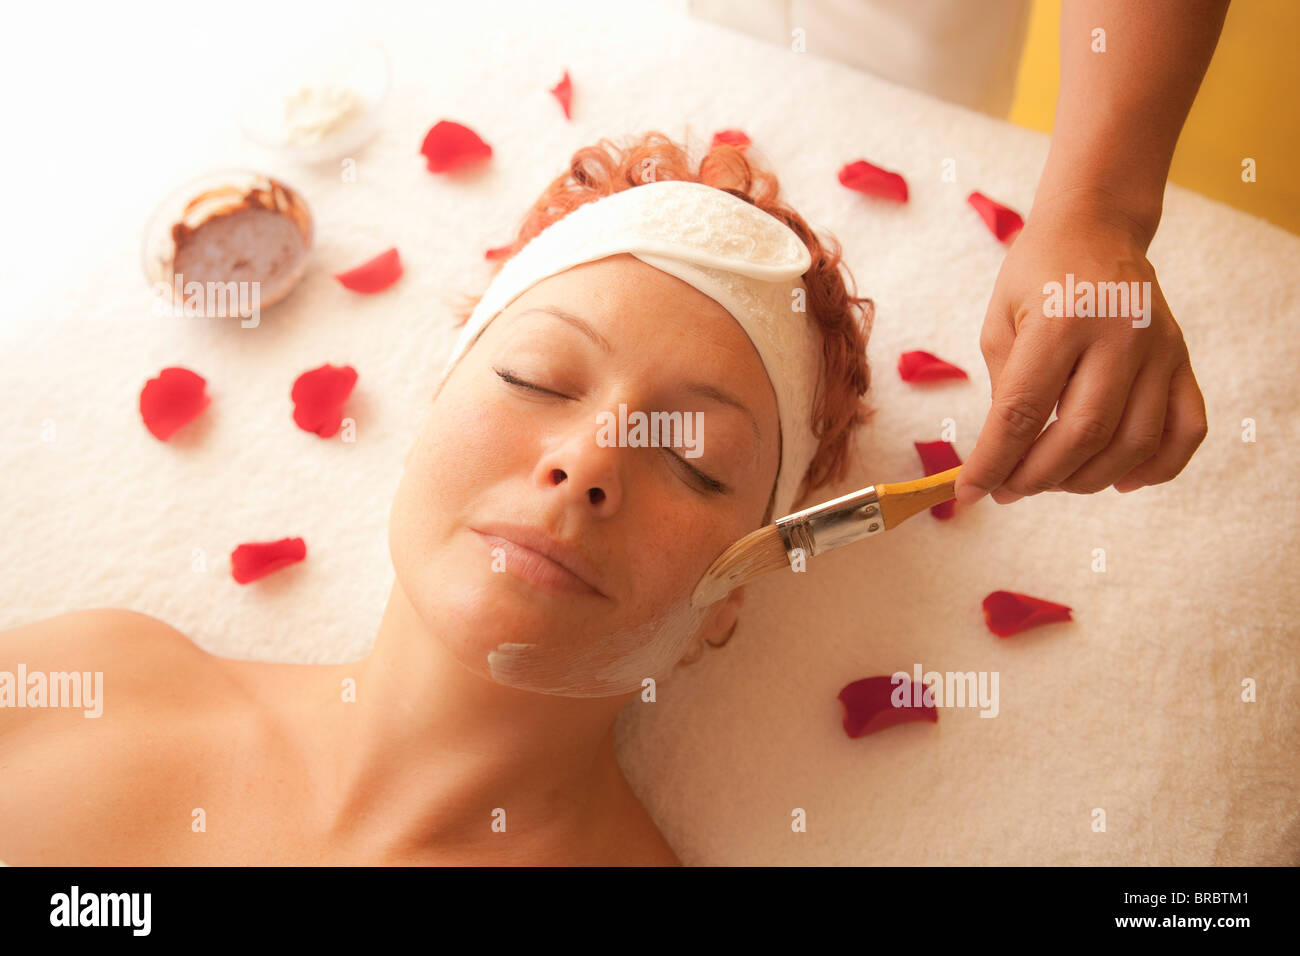 woman getting a facial treatment Stock Photo